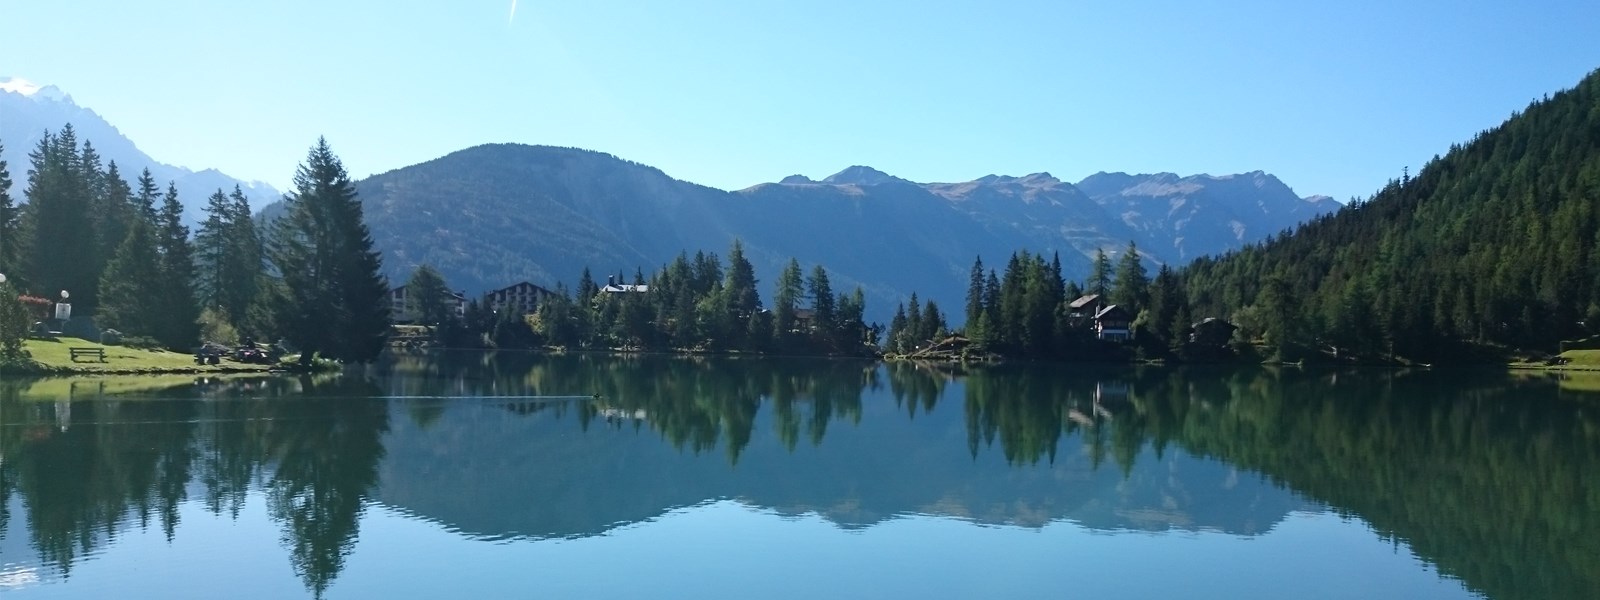 Welcome to Champex-Lac